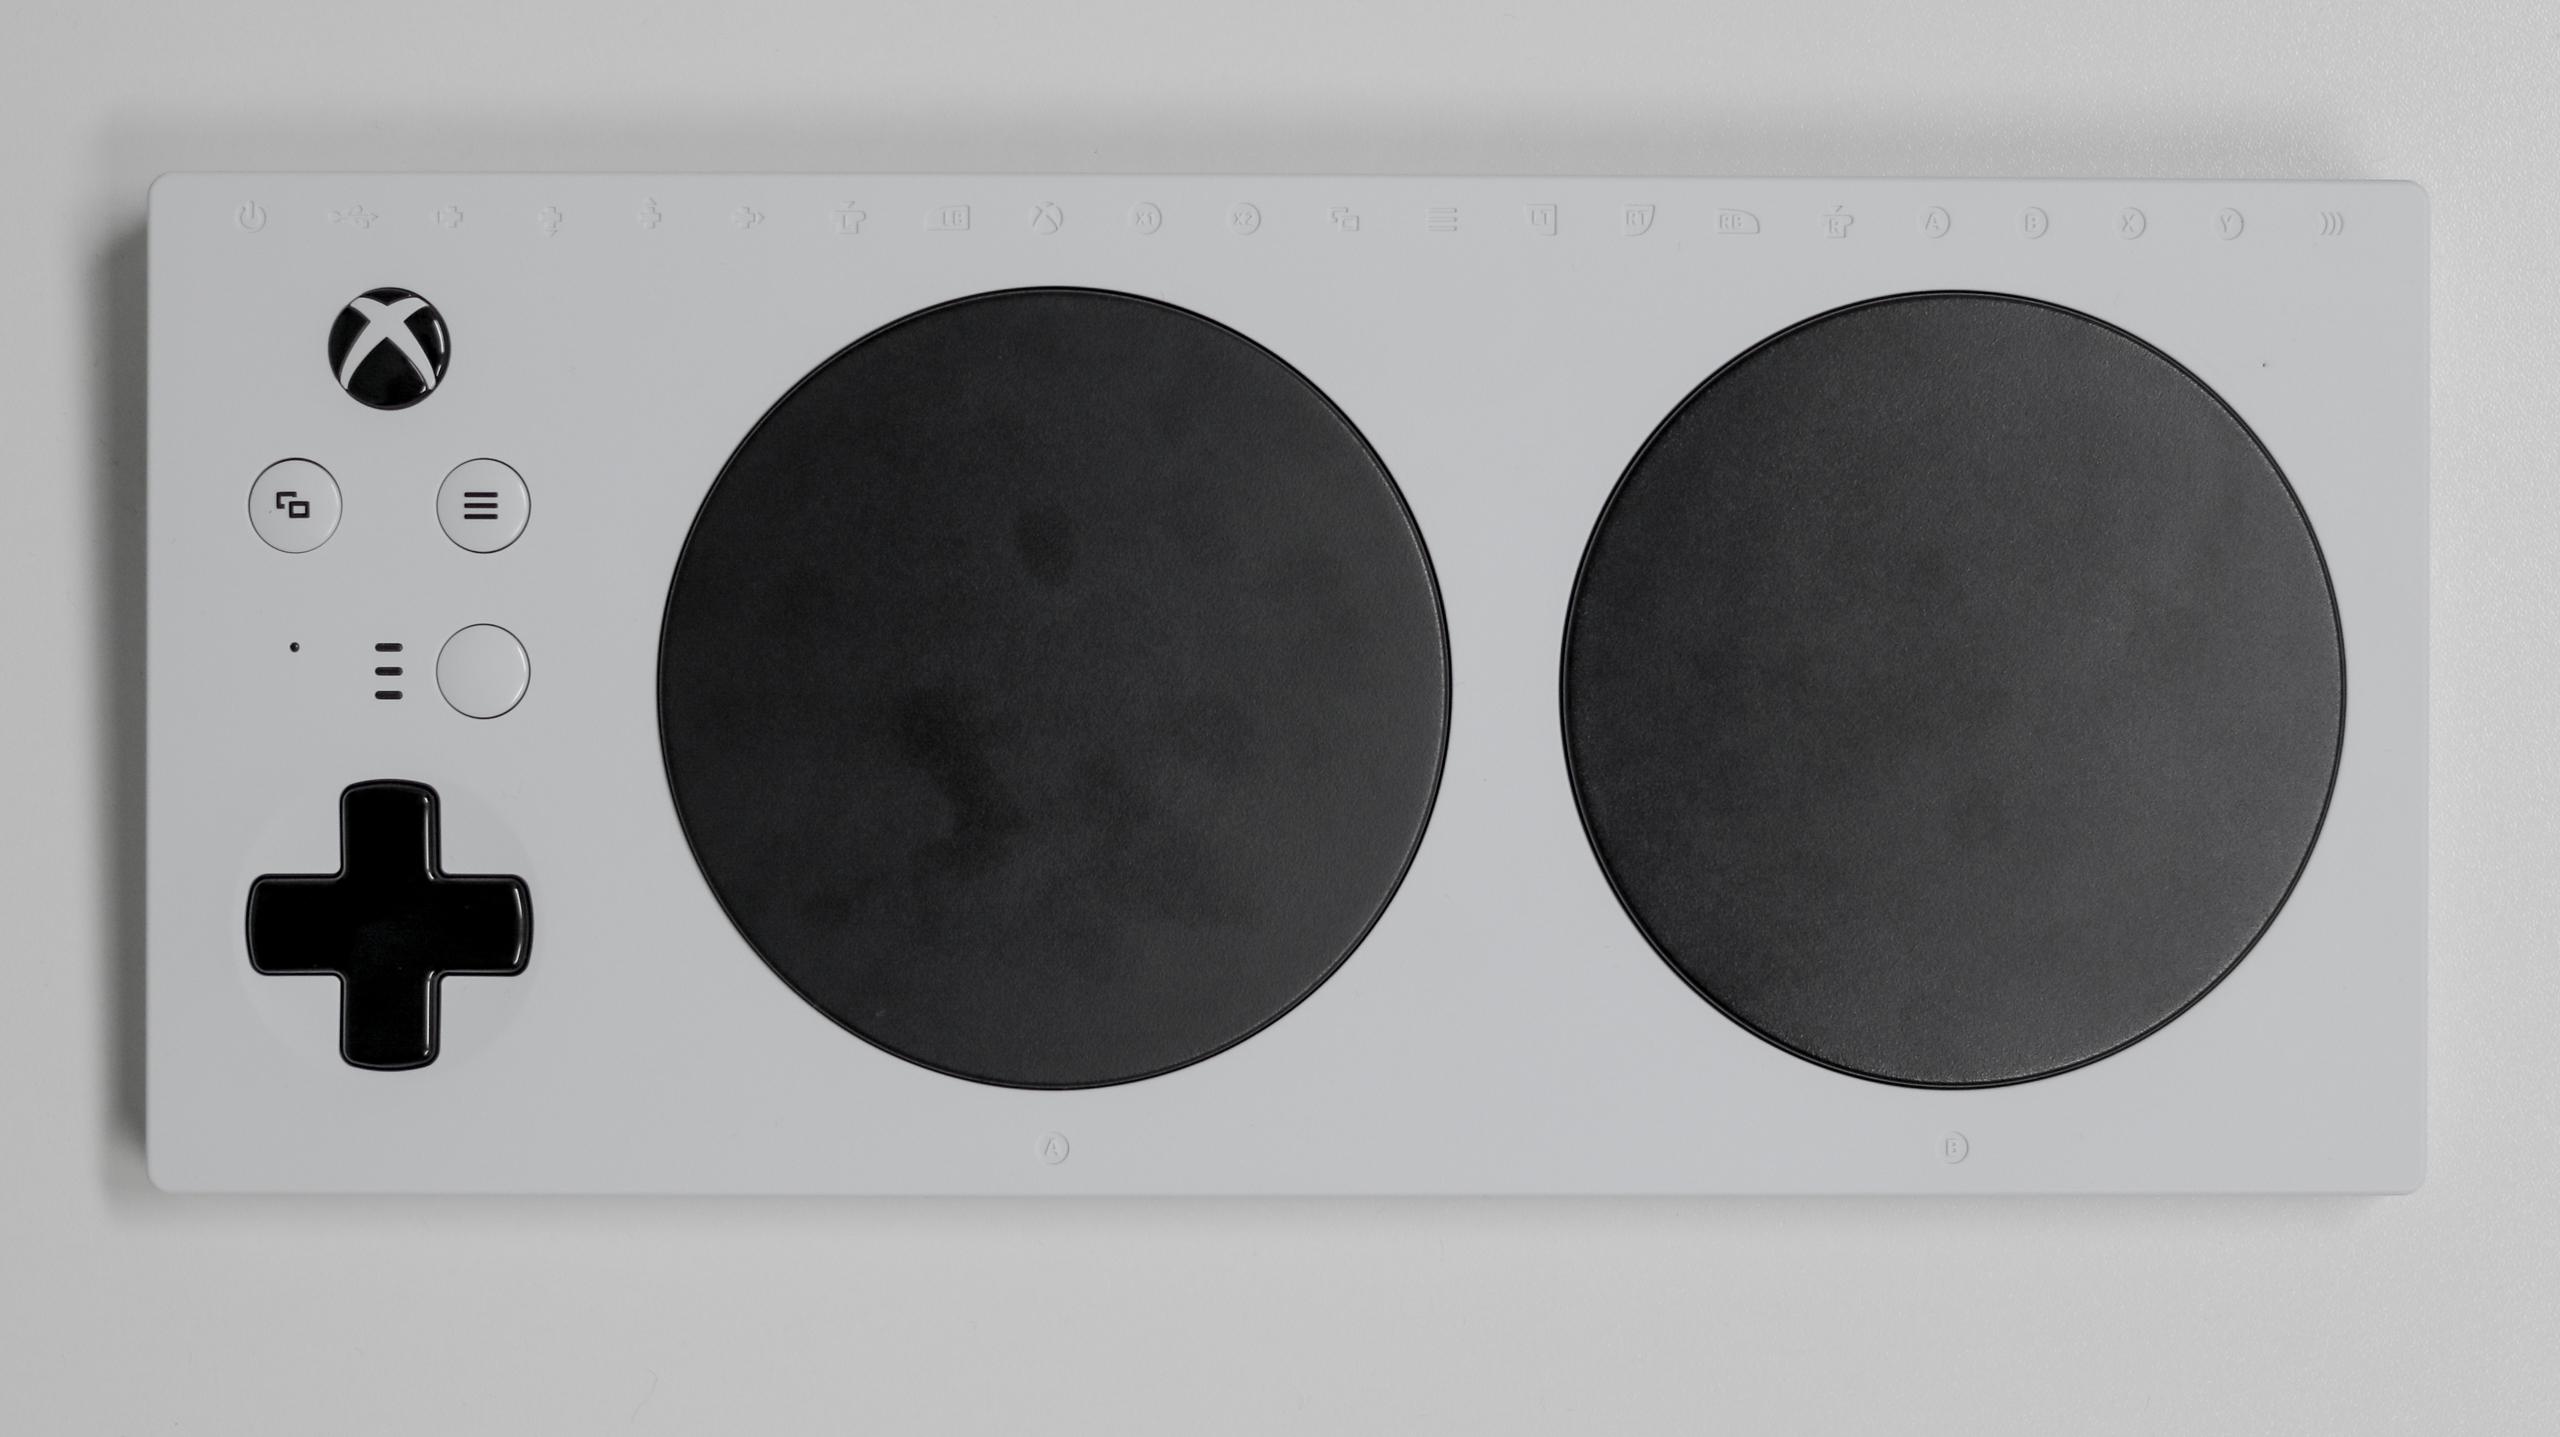 Yes, the Xbox Adaptive Controller is innovative – if you can afford the added expenses